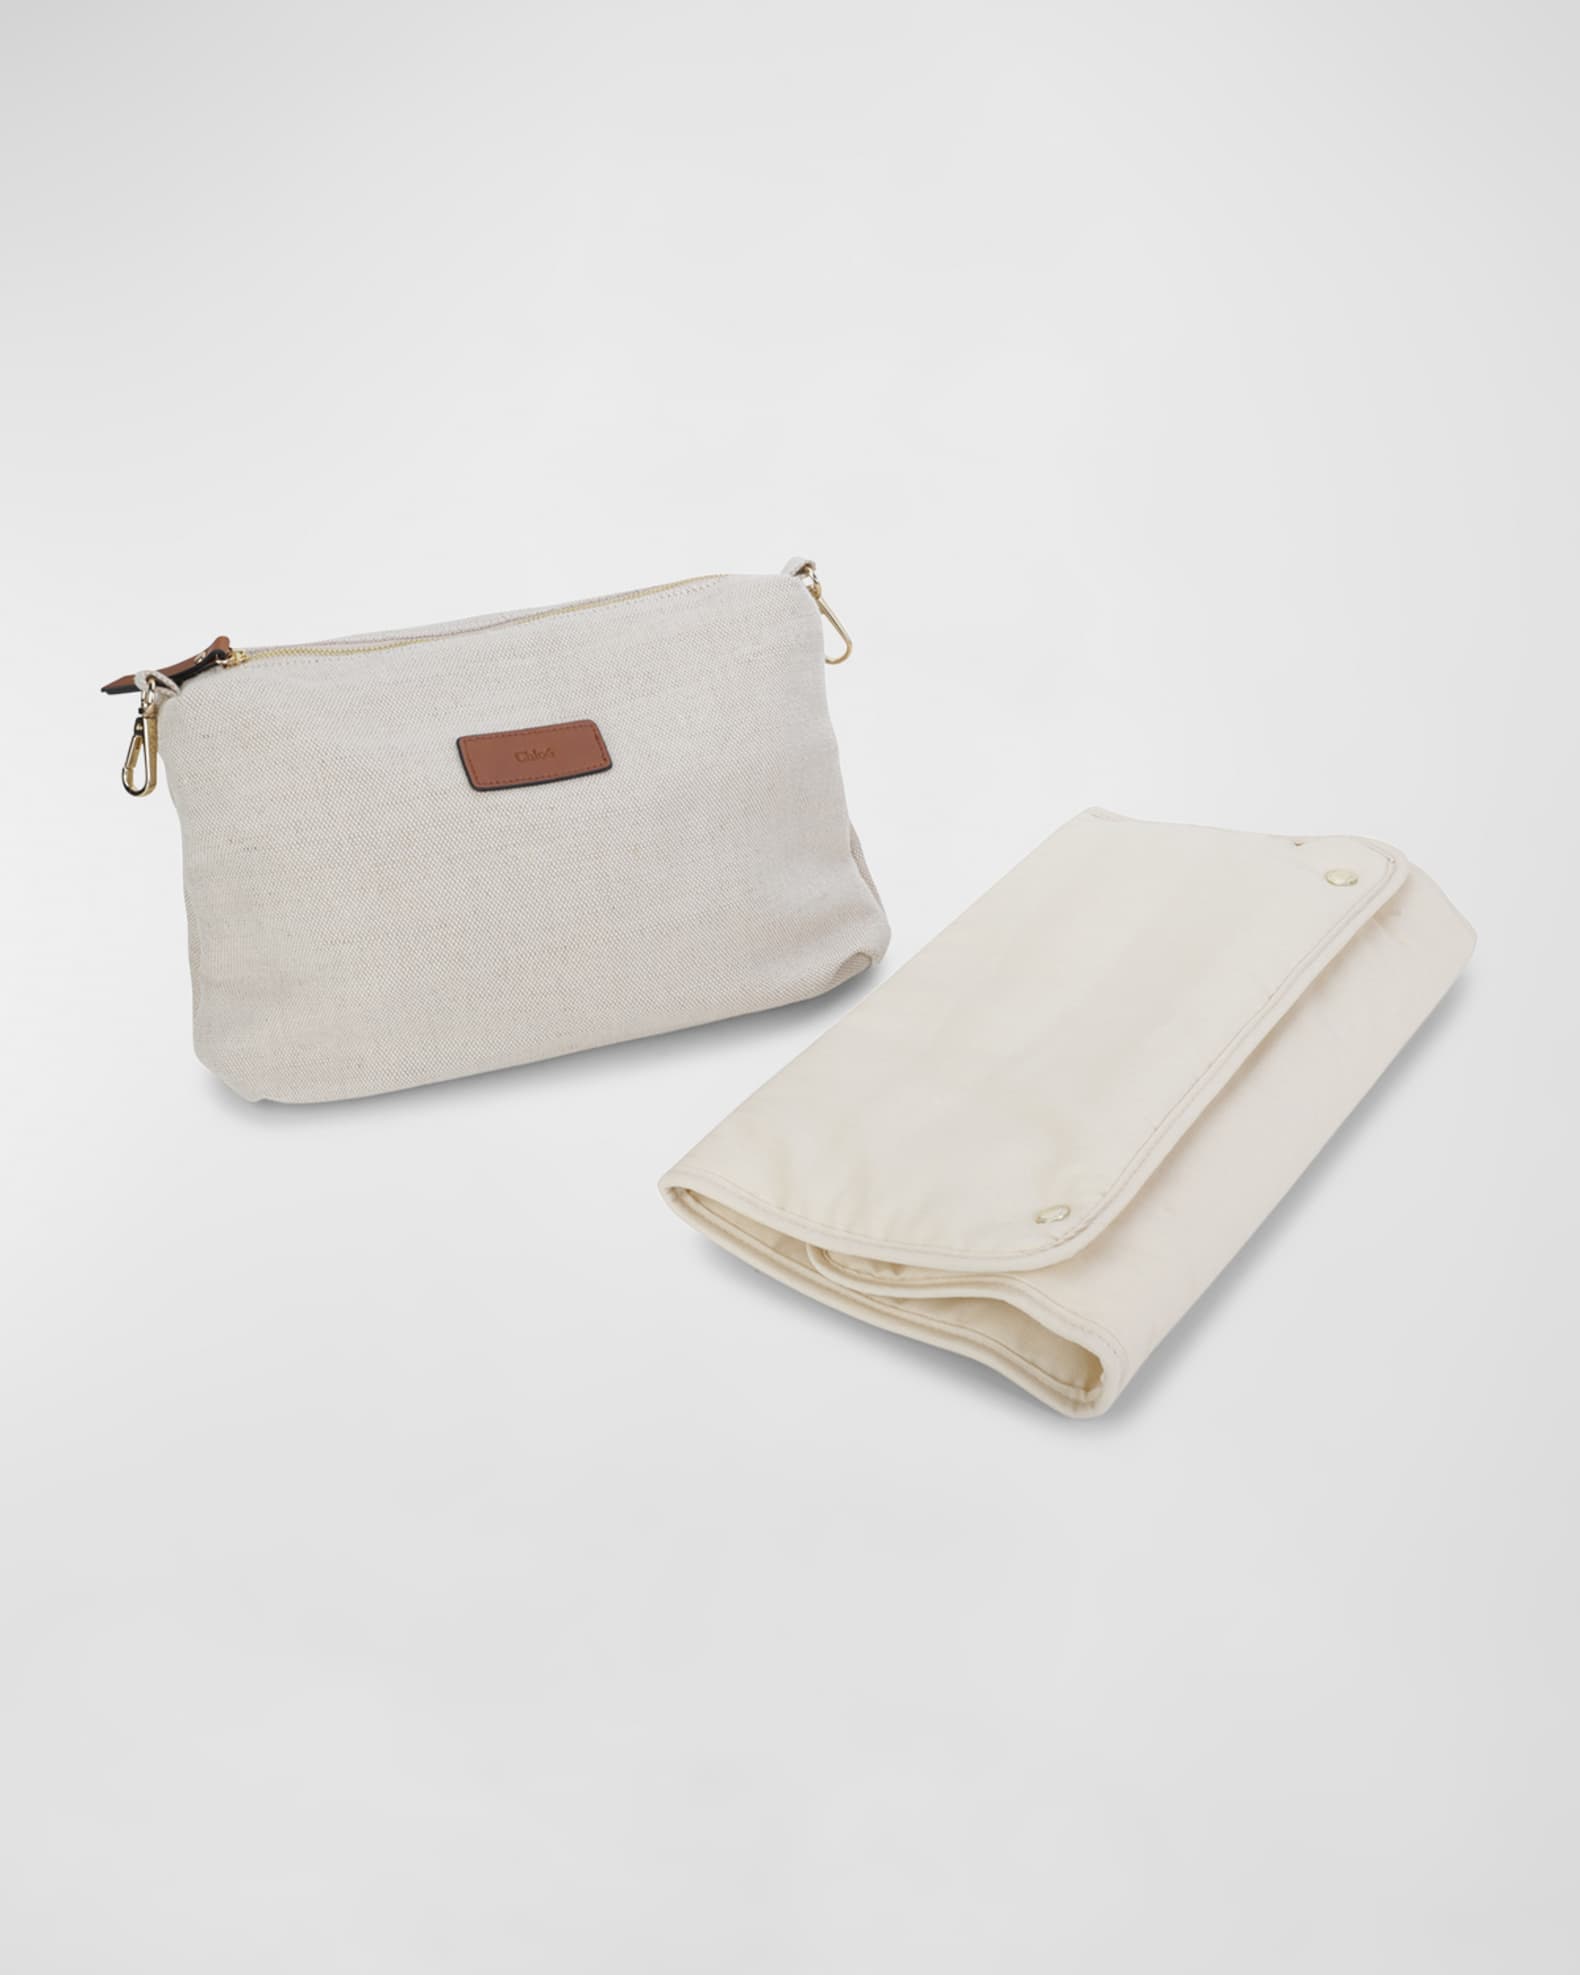 Chloé Logo Canvas Leather Changing Bag